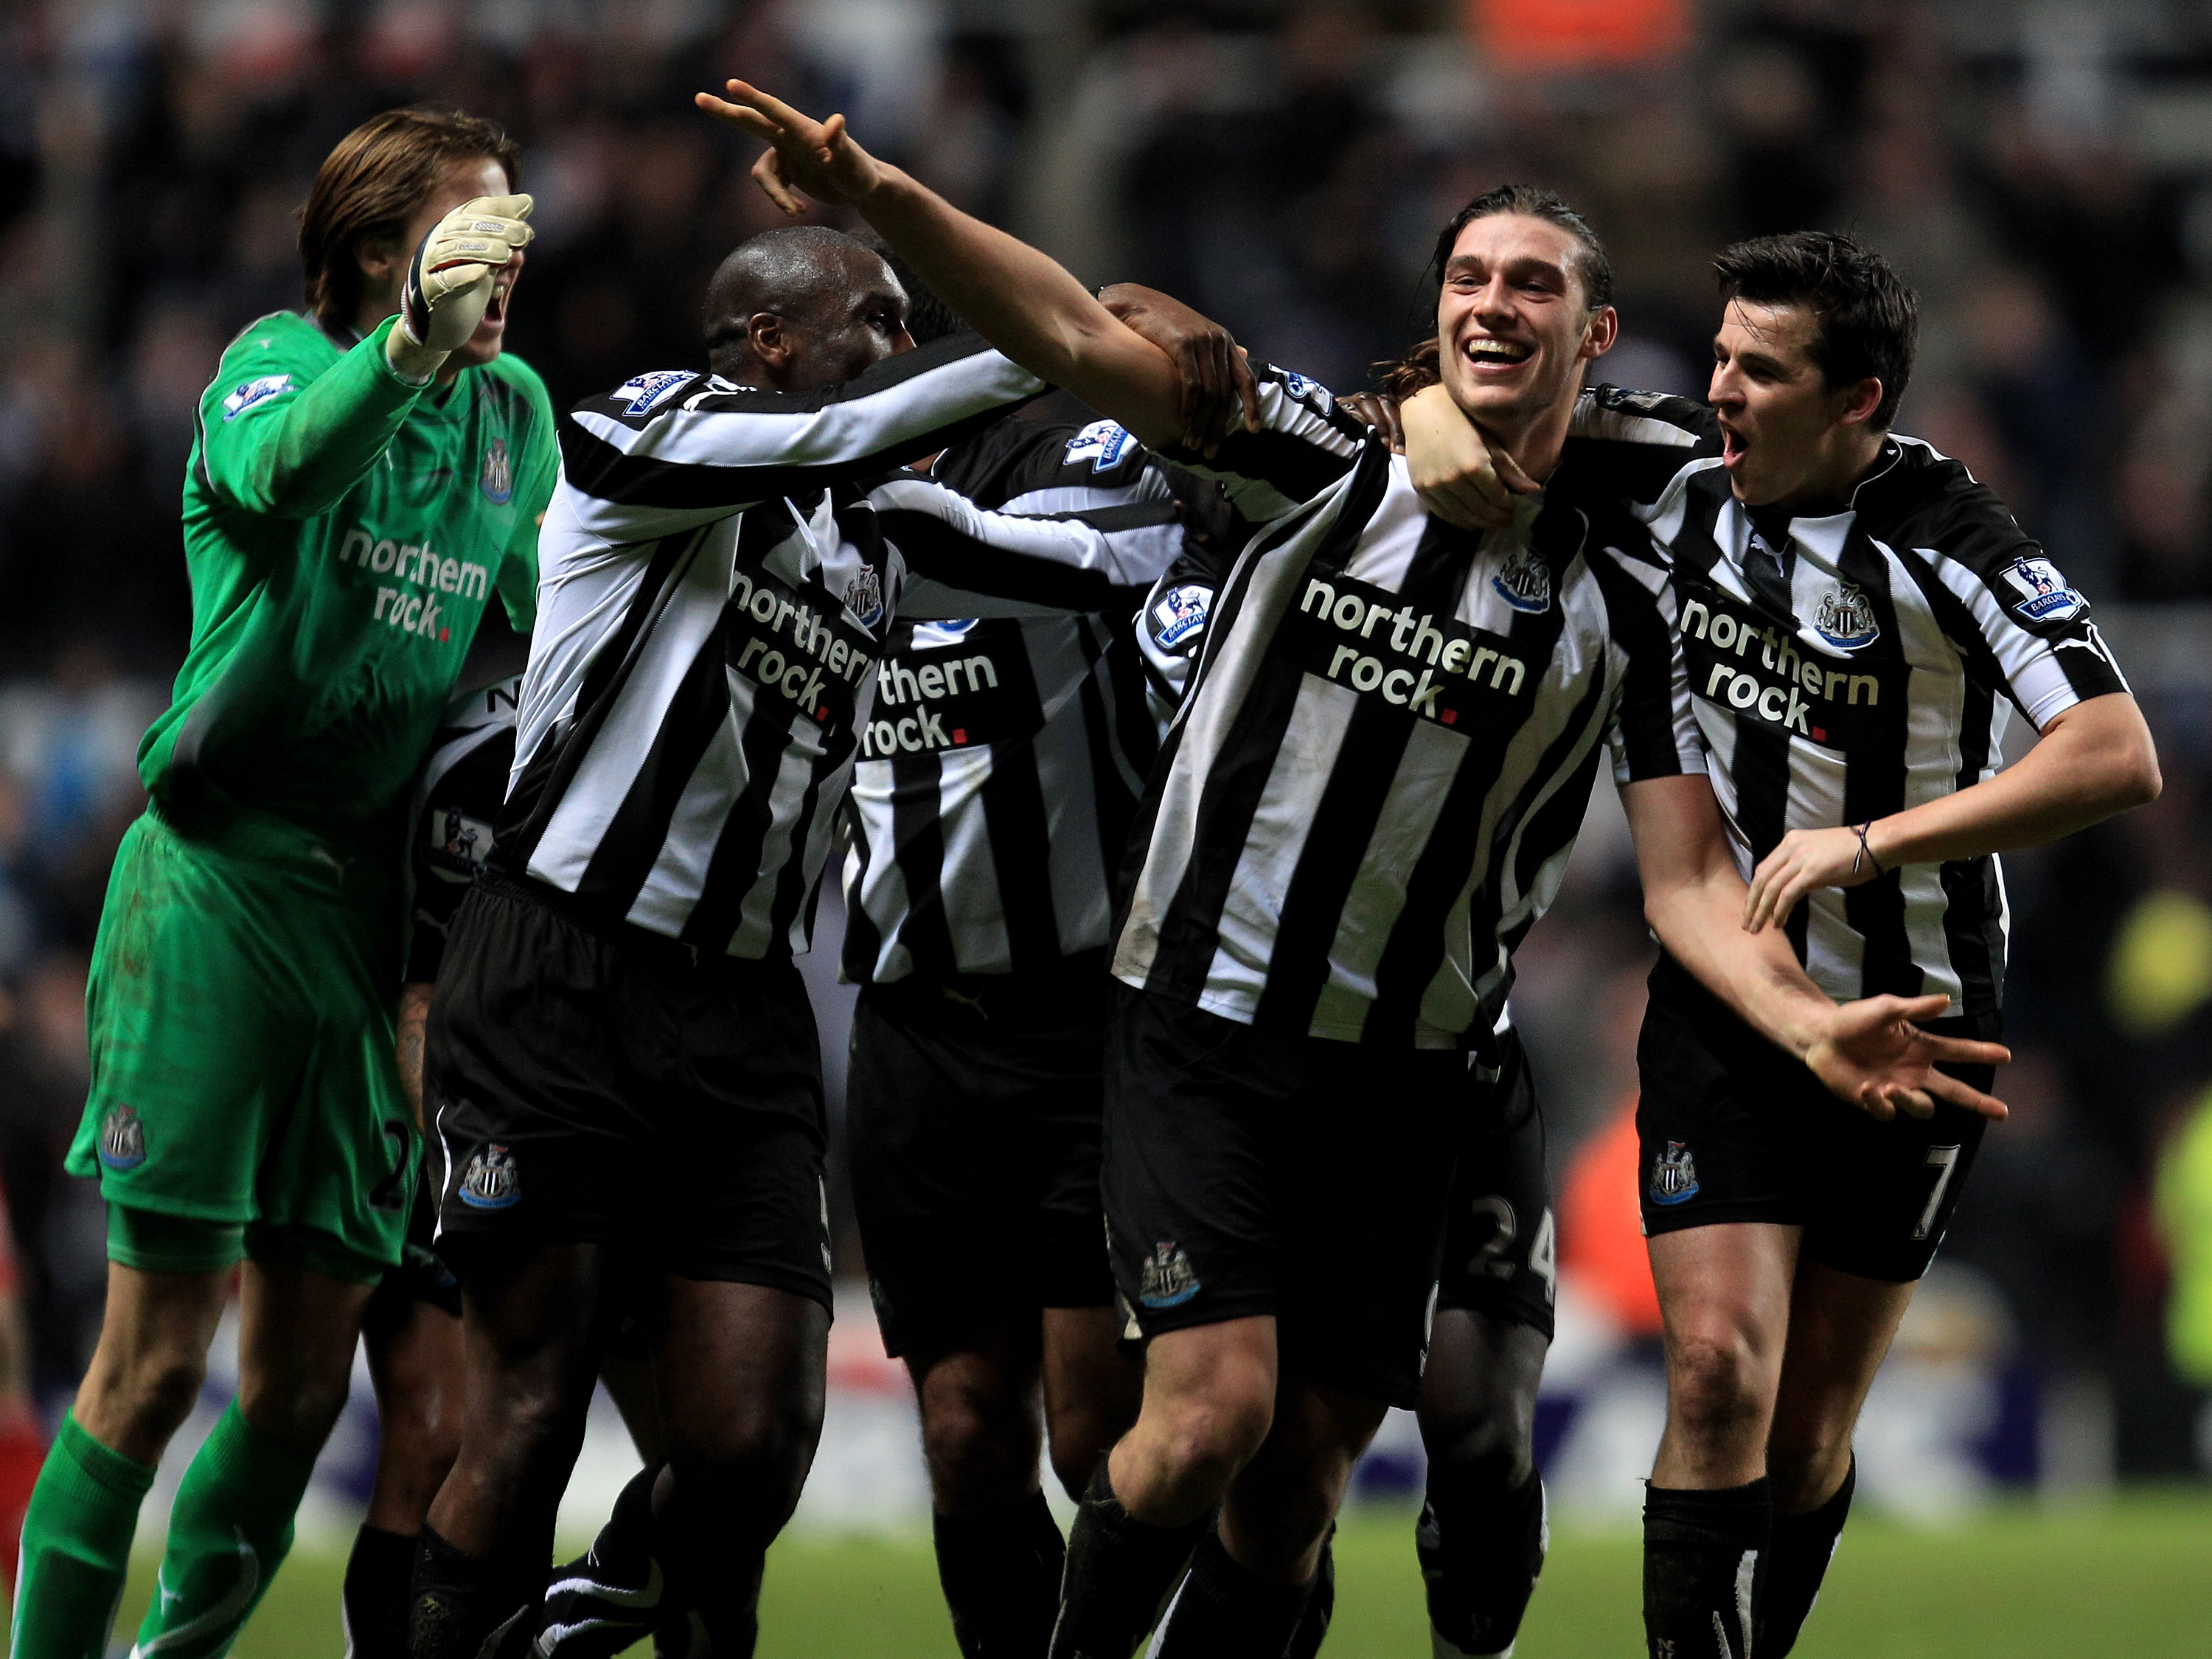 NEWCASTLE UPON TYNE, ENGLAND - DECEMBER 11:  Andy Carroll of Newcastle United celebrates scoring his team's third goal with his team mates during the Barclays Premier League match between Newcastle United and Liverpool at St James' Park on December 11, 20